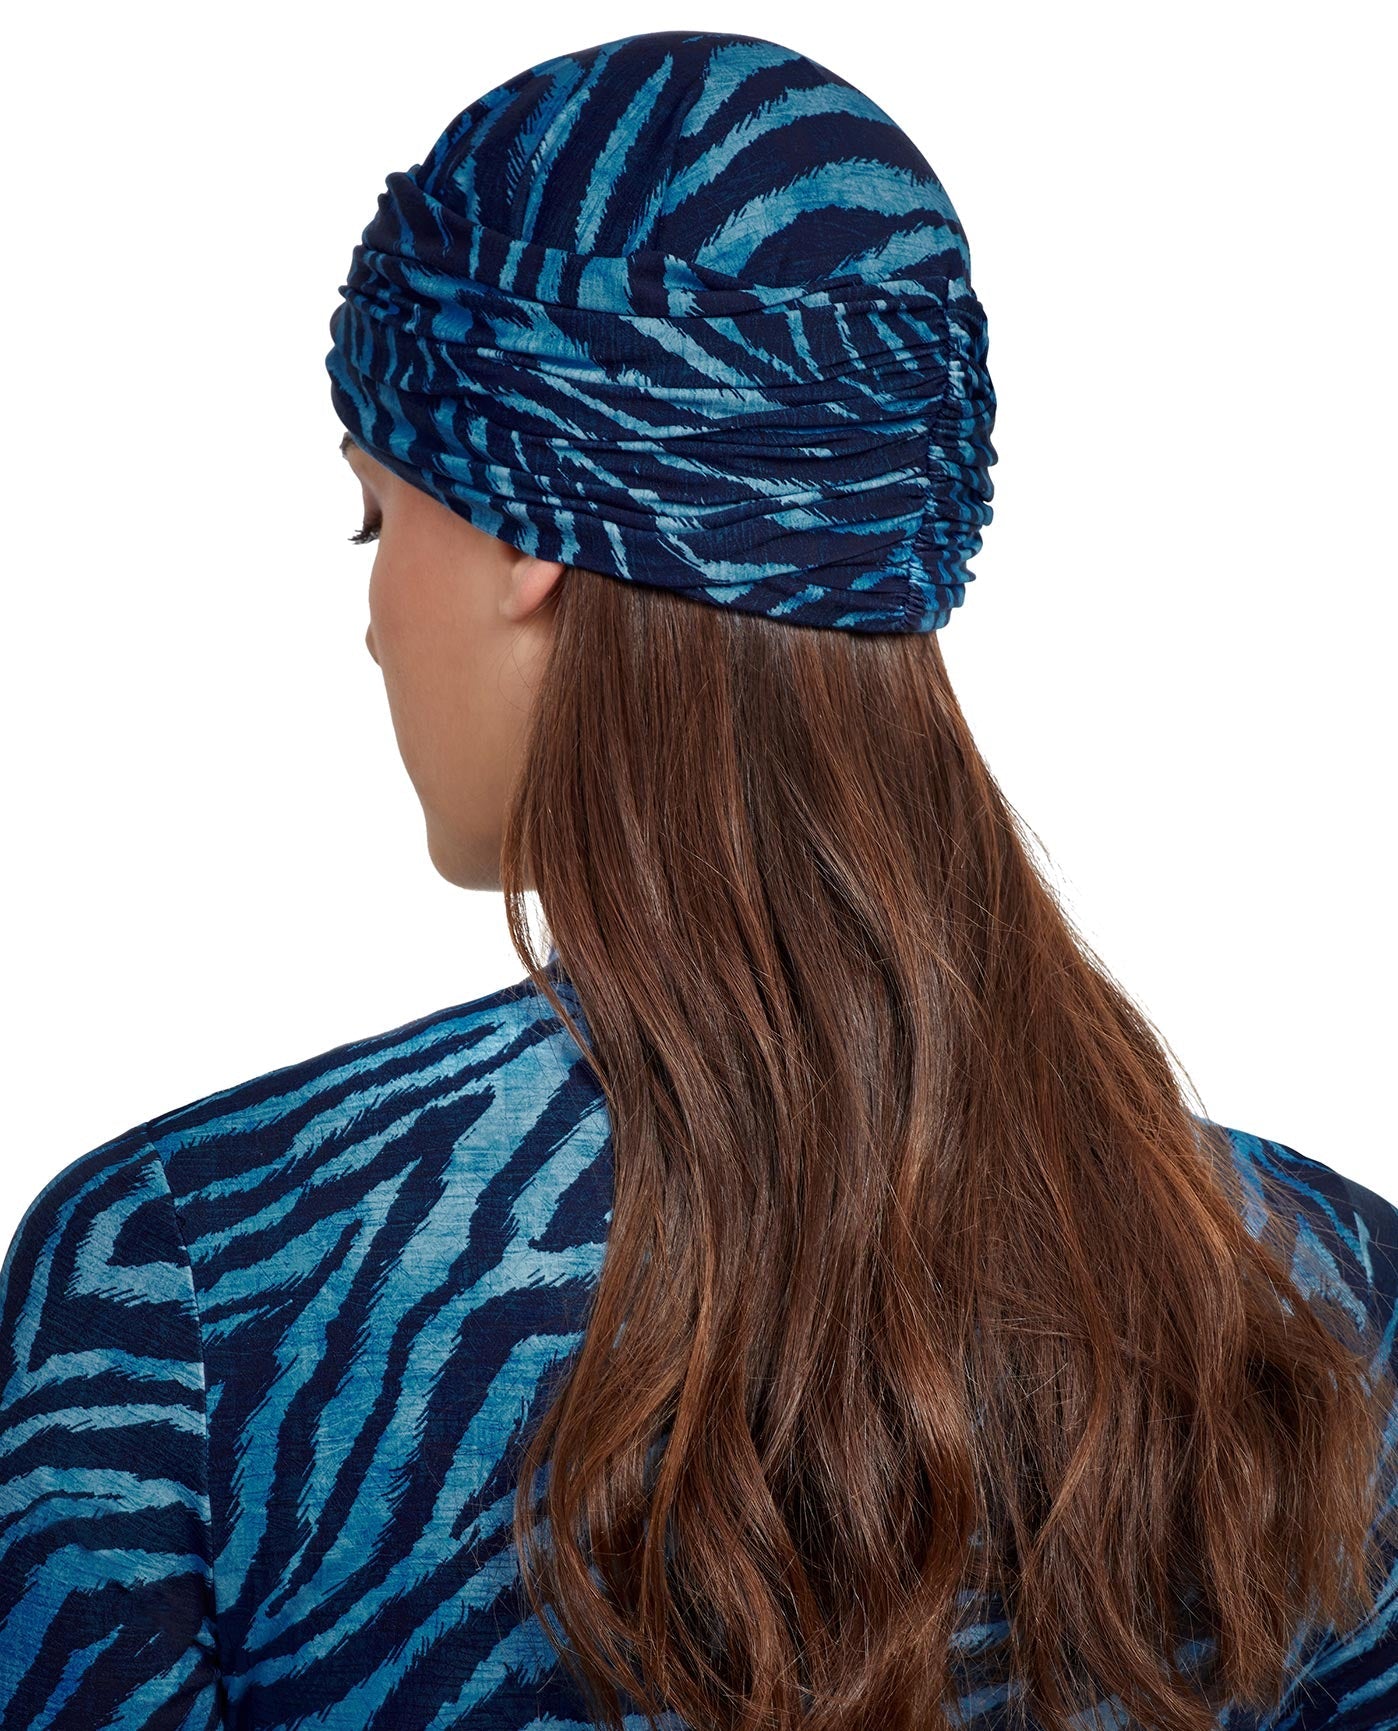 Back View Of Gottex Modest Knotted Hair Covering | GOTTEX MODEST WILDLIFE BLUE